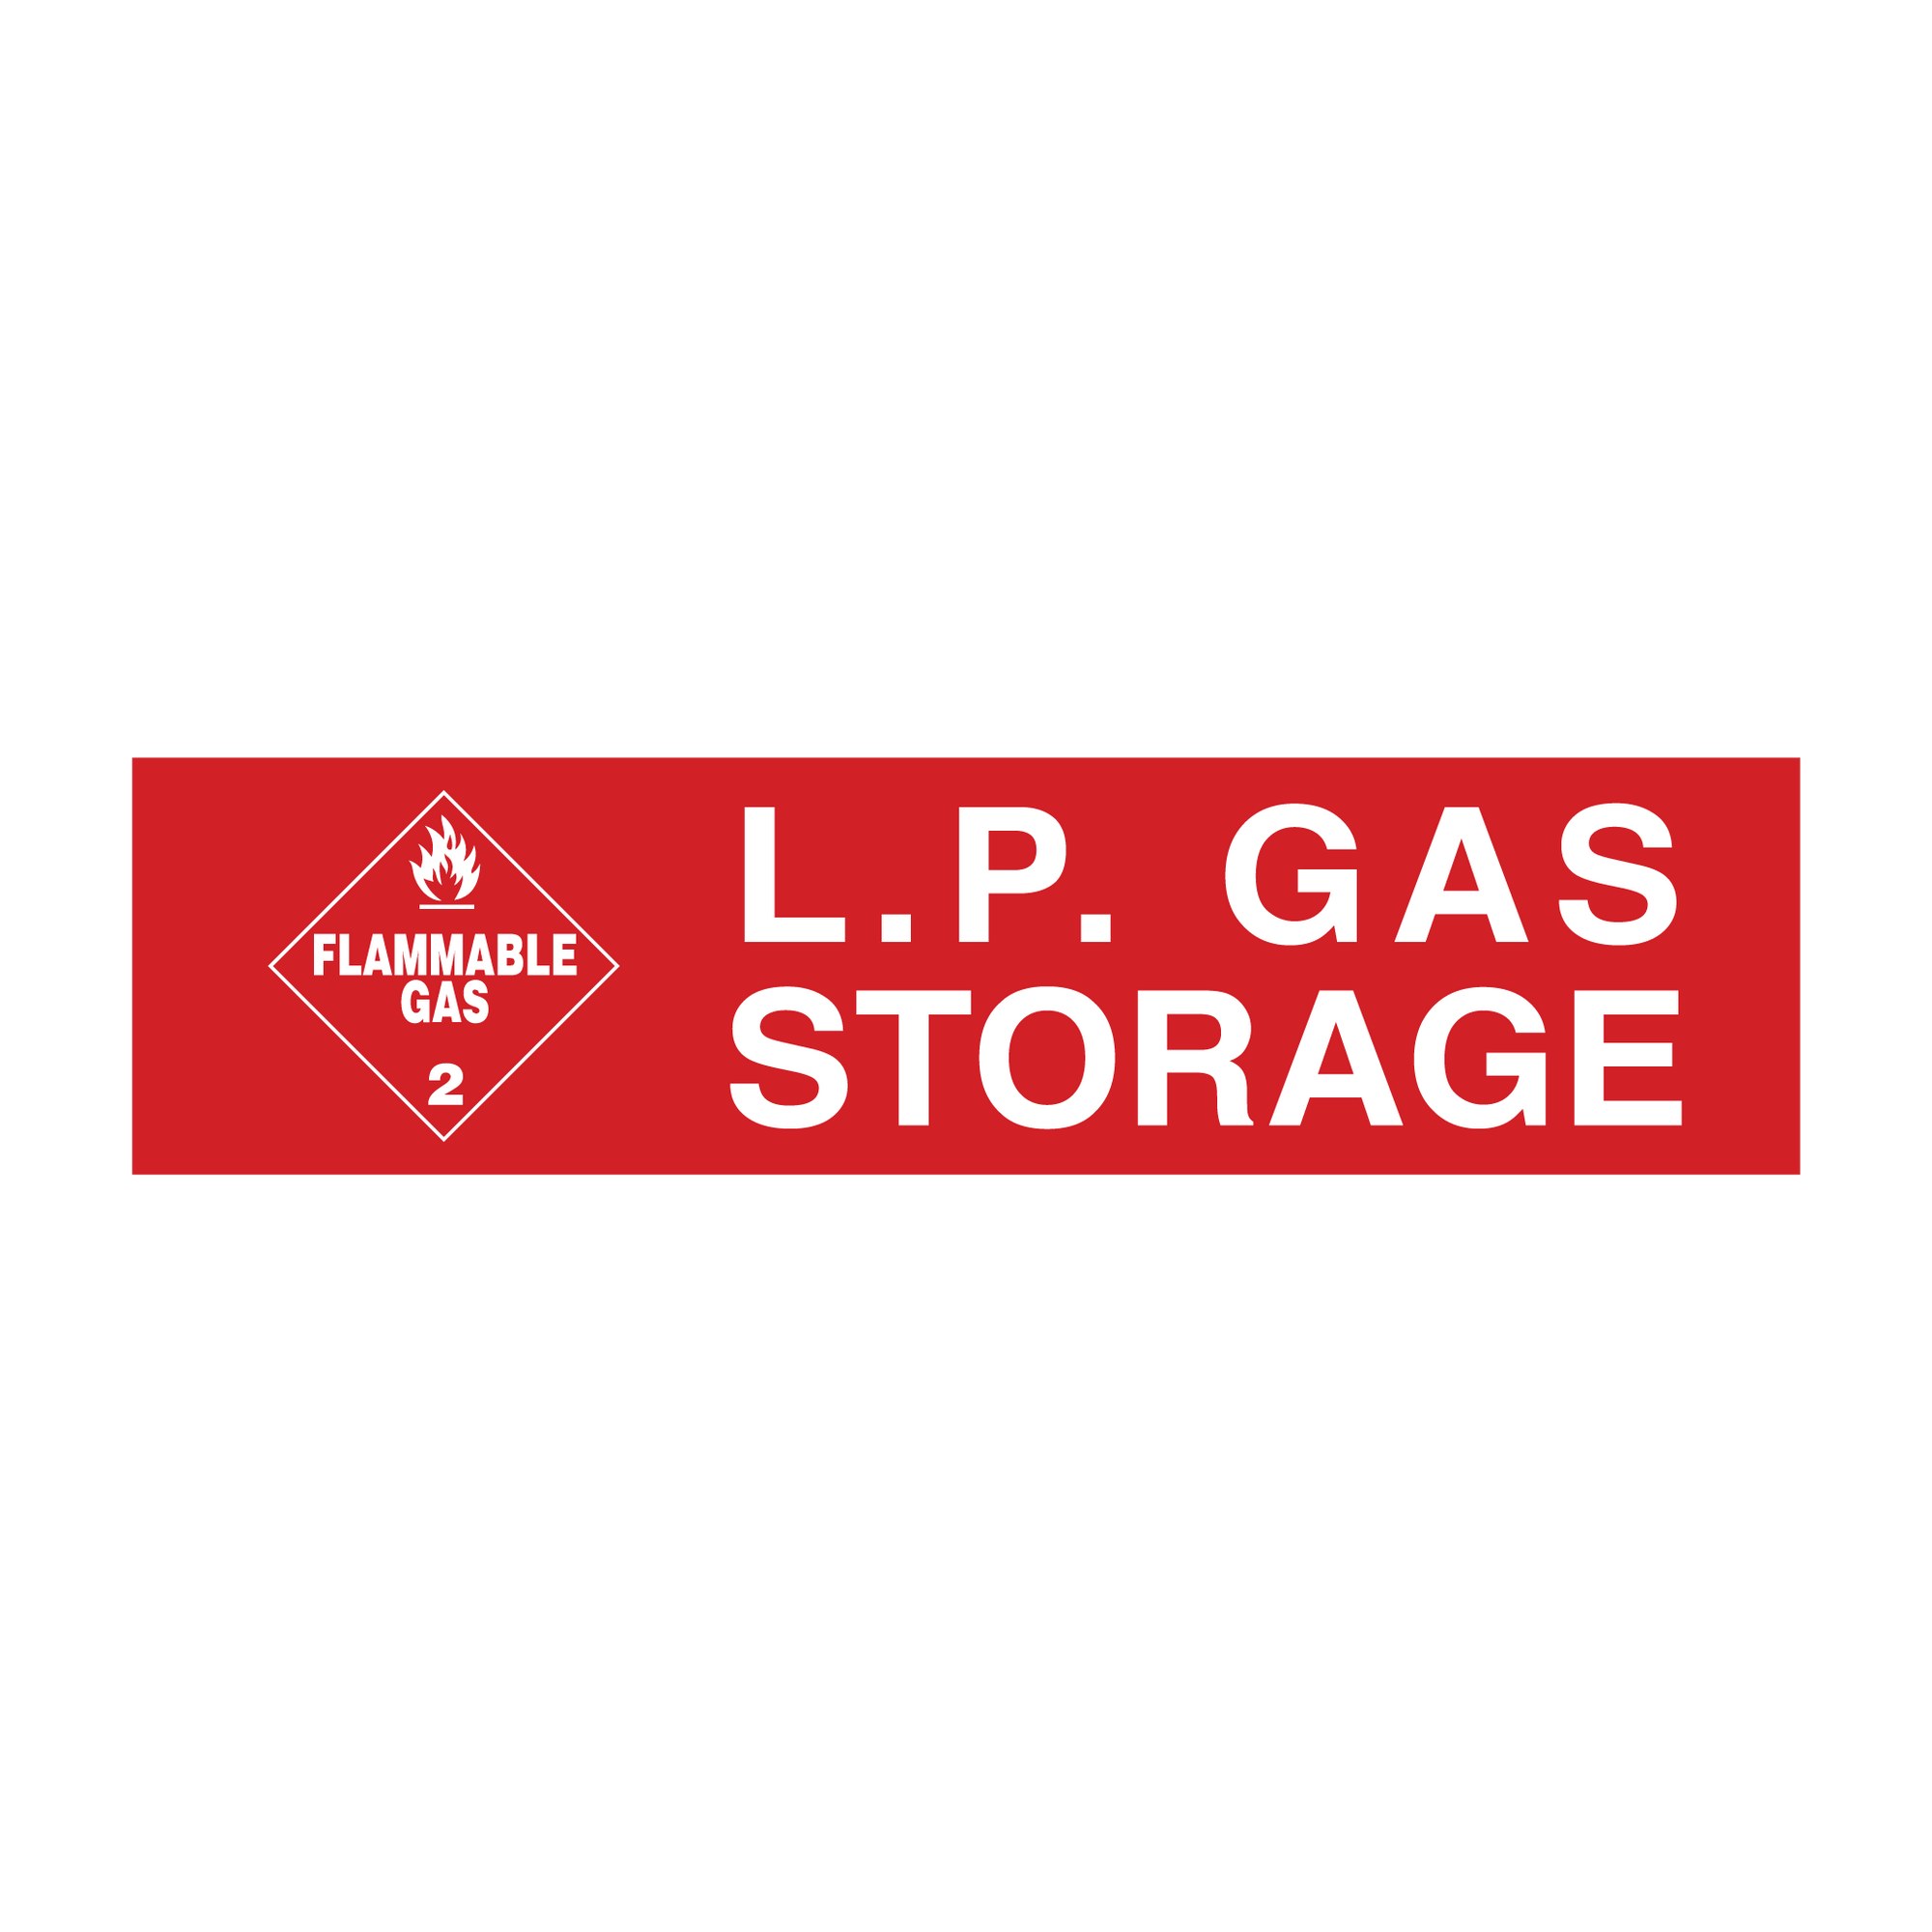 FLAMABLE GAS - L.P. GAS STORAGE - S21